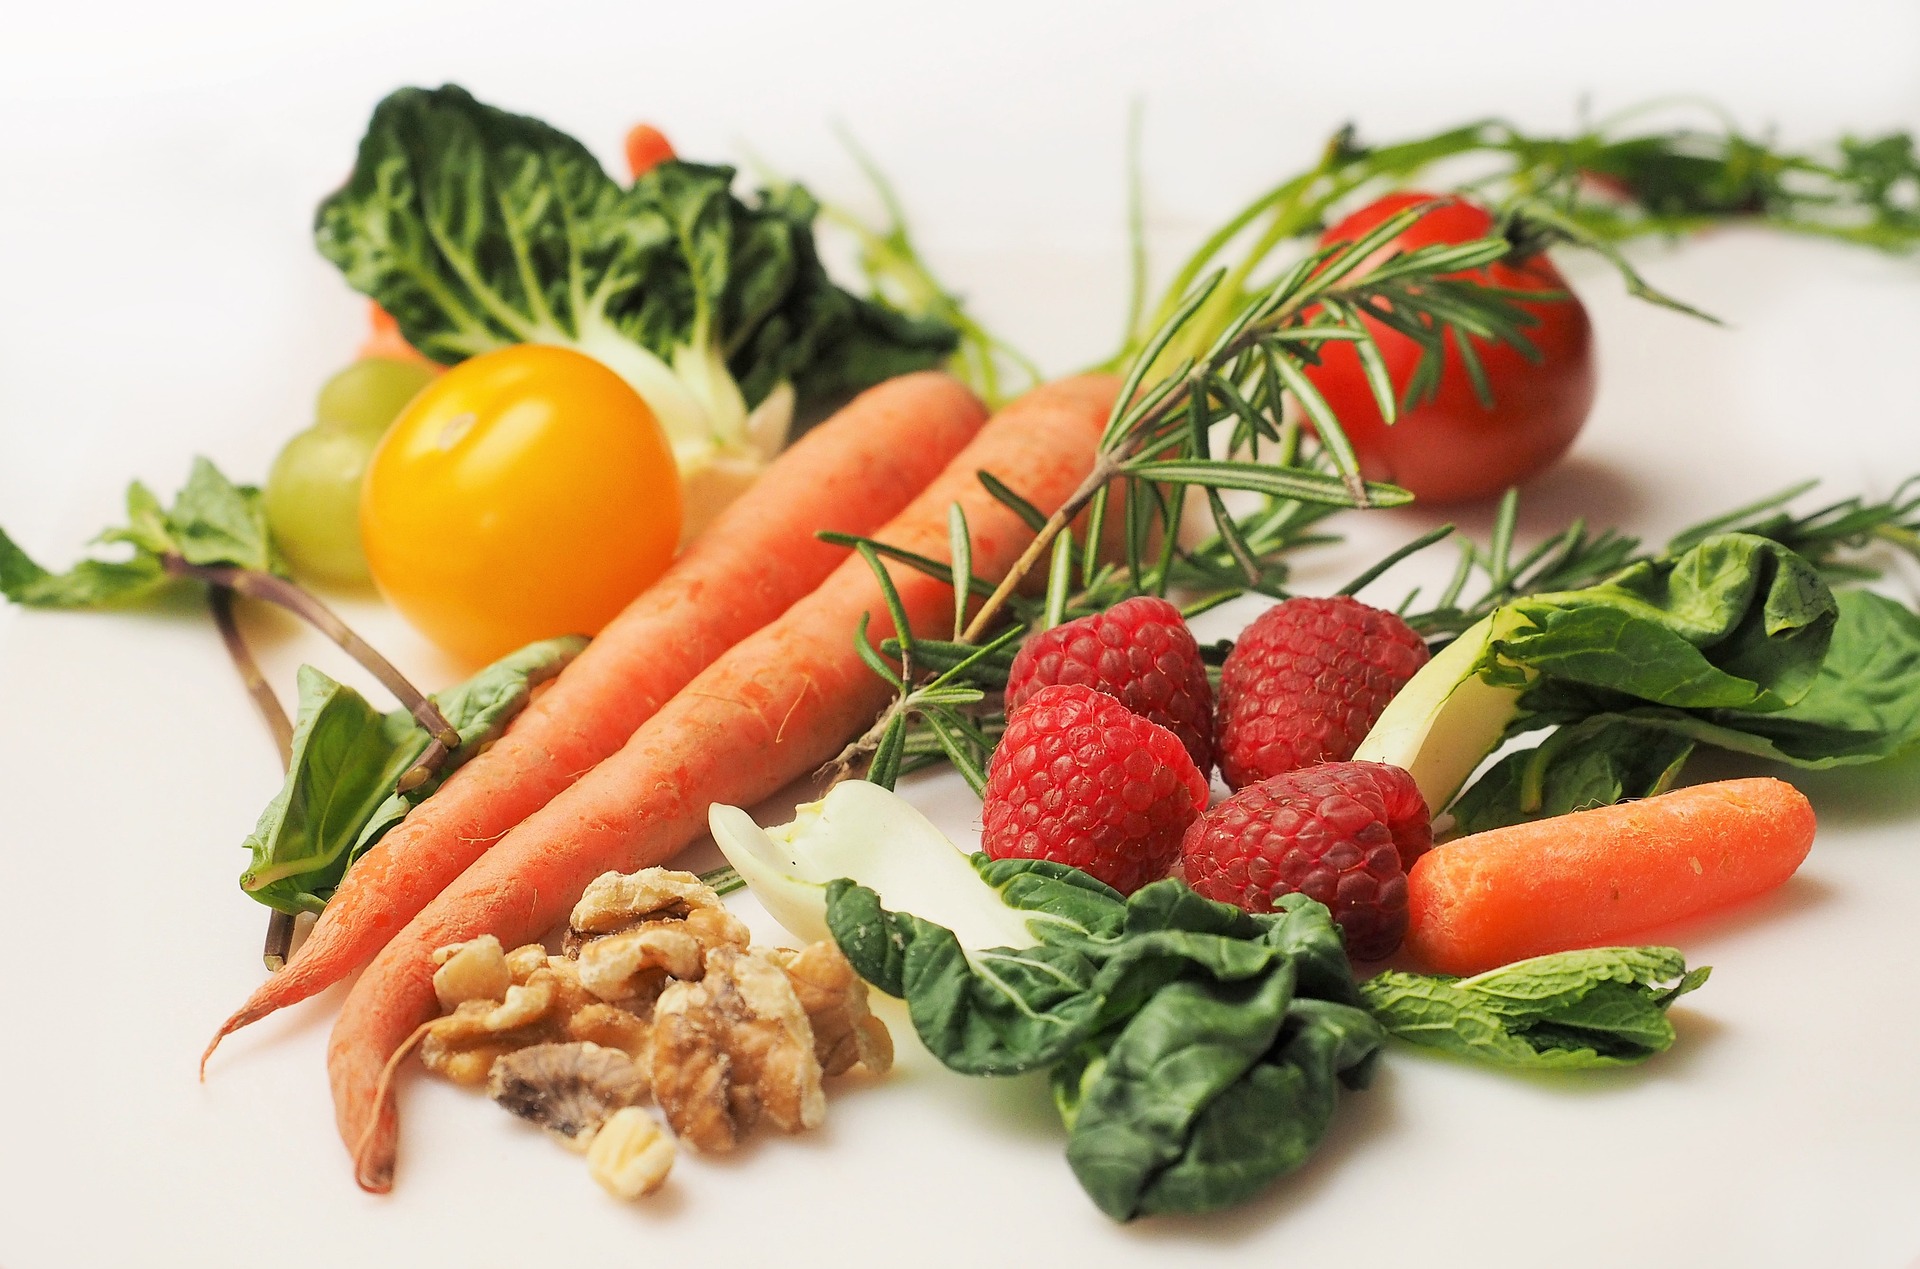 Assortment of healthy foods, including walnuts, raspberries, carrots, red and yellow peppers, tomatoes, and greens